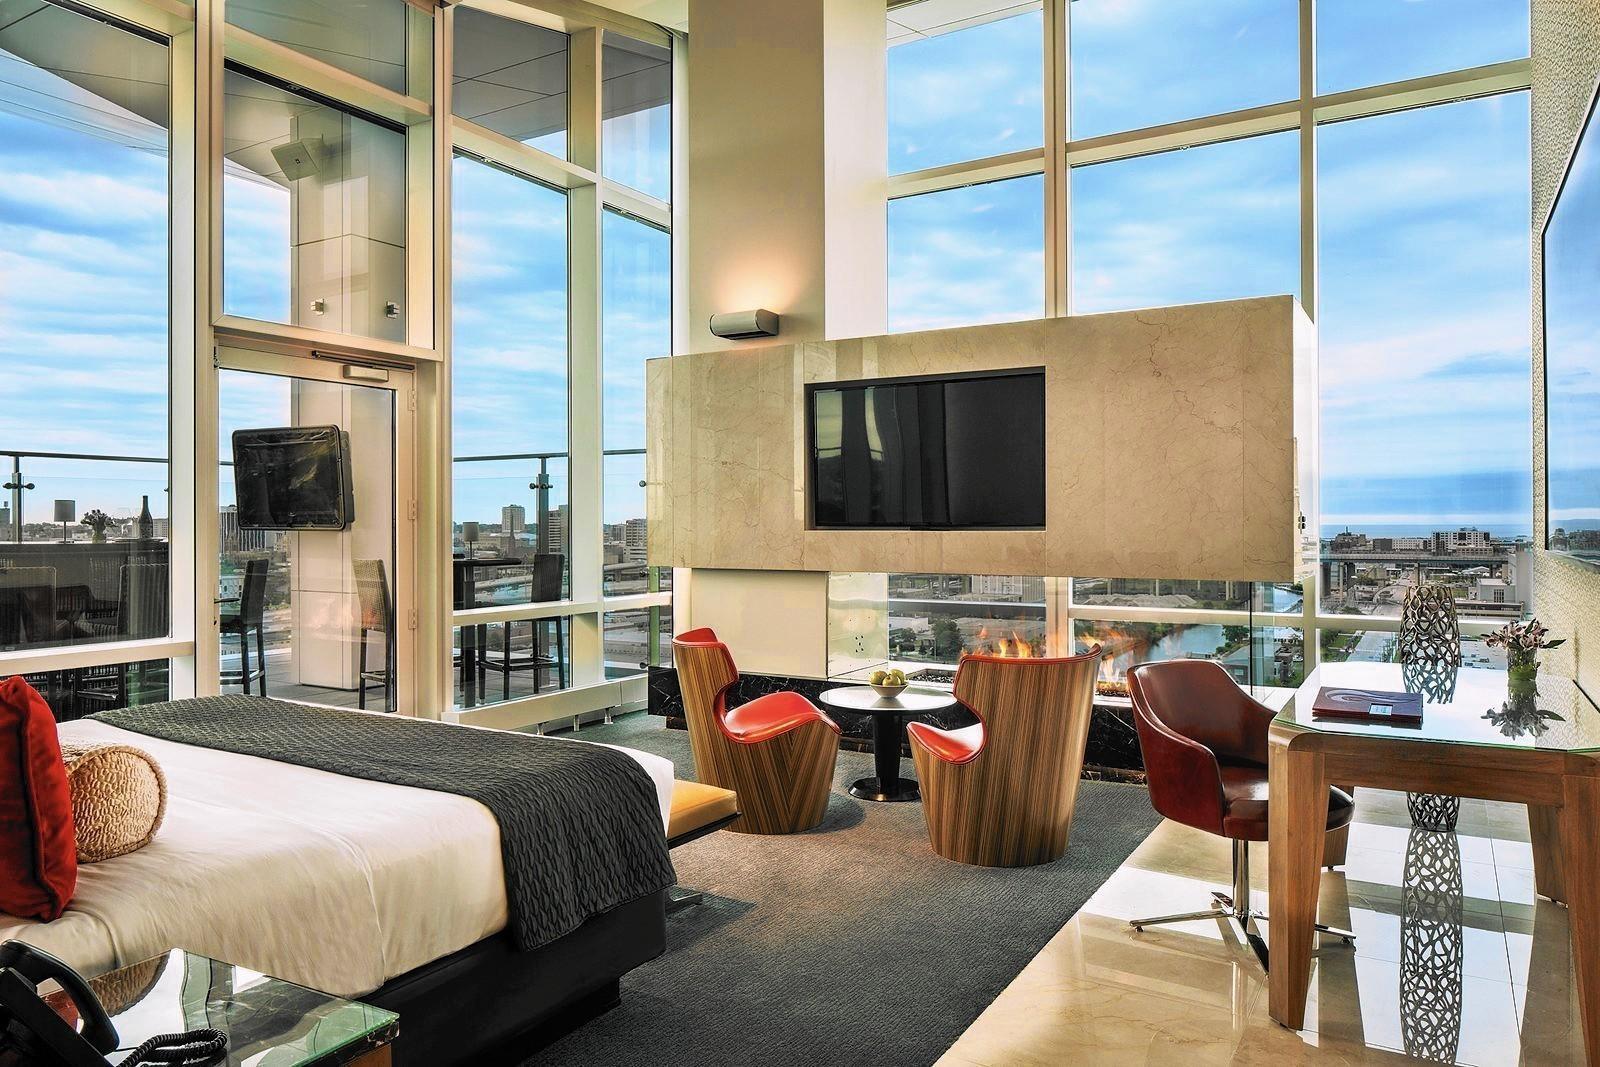 10 great hotel rooms in the Midwest - Chicago Tribune